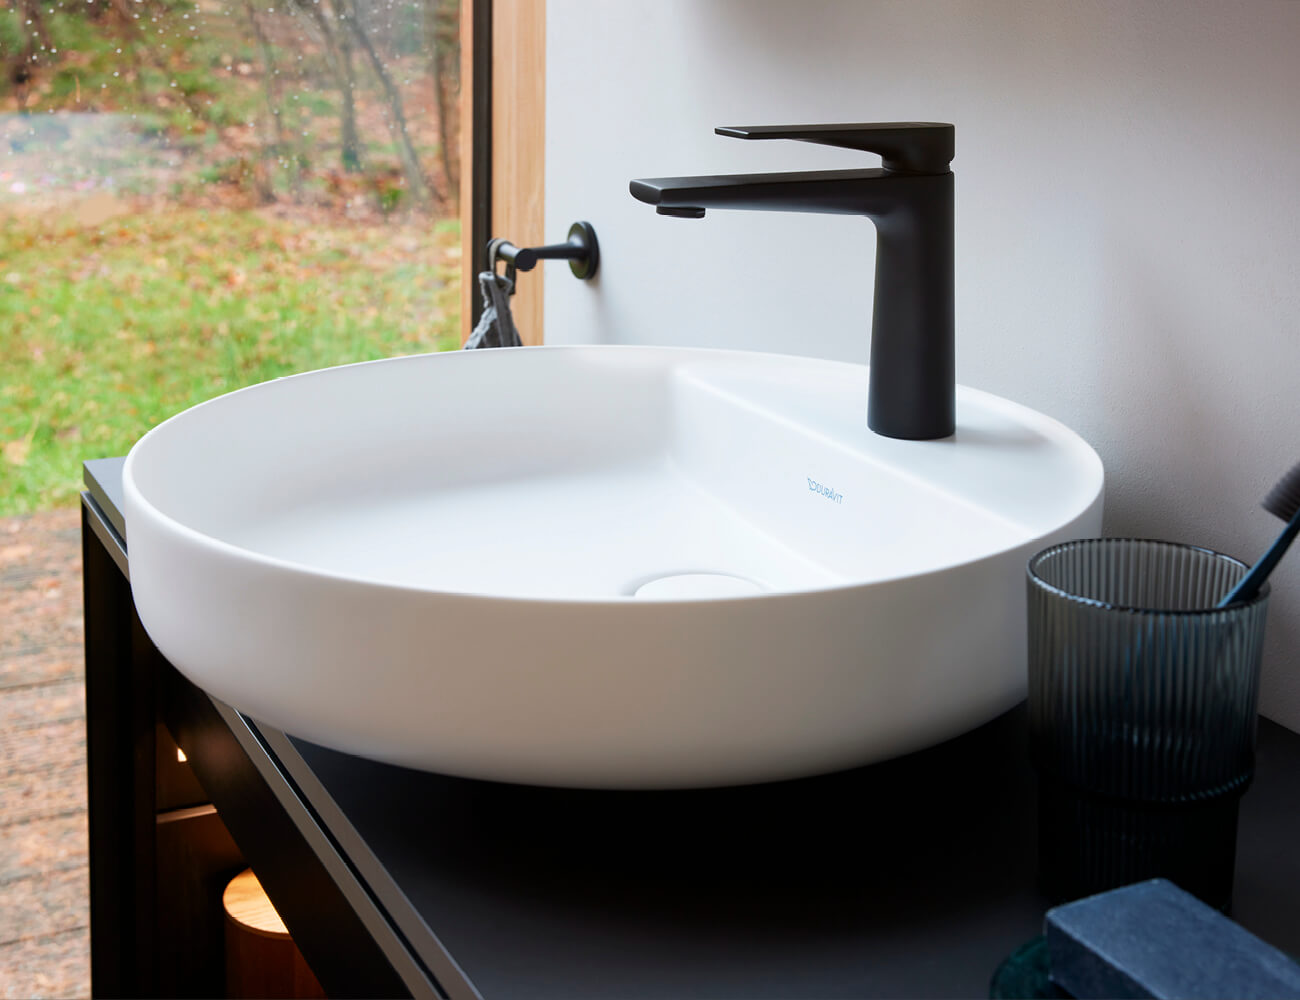 Vitrium countertop sink combined with Tulum faucet in matte black
